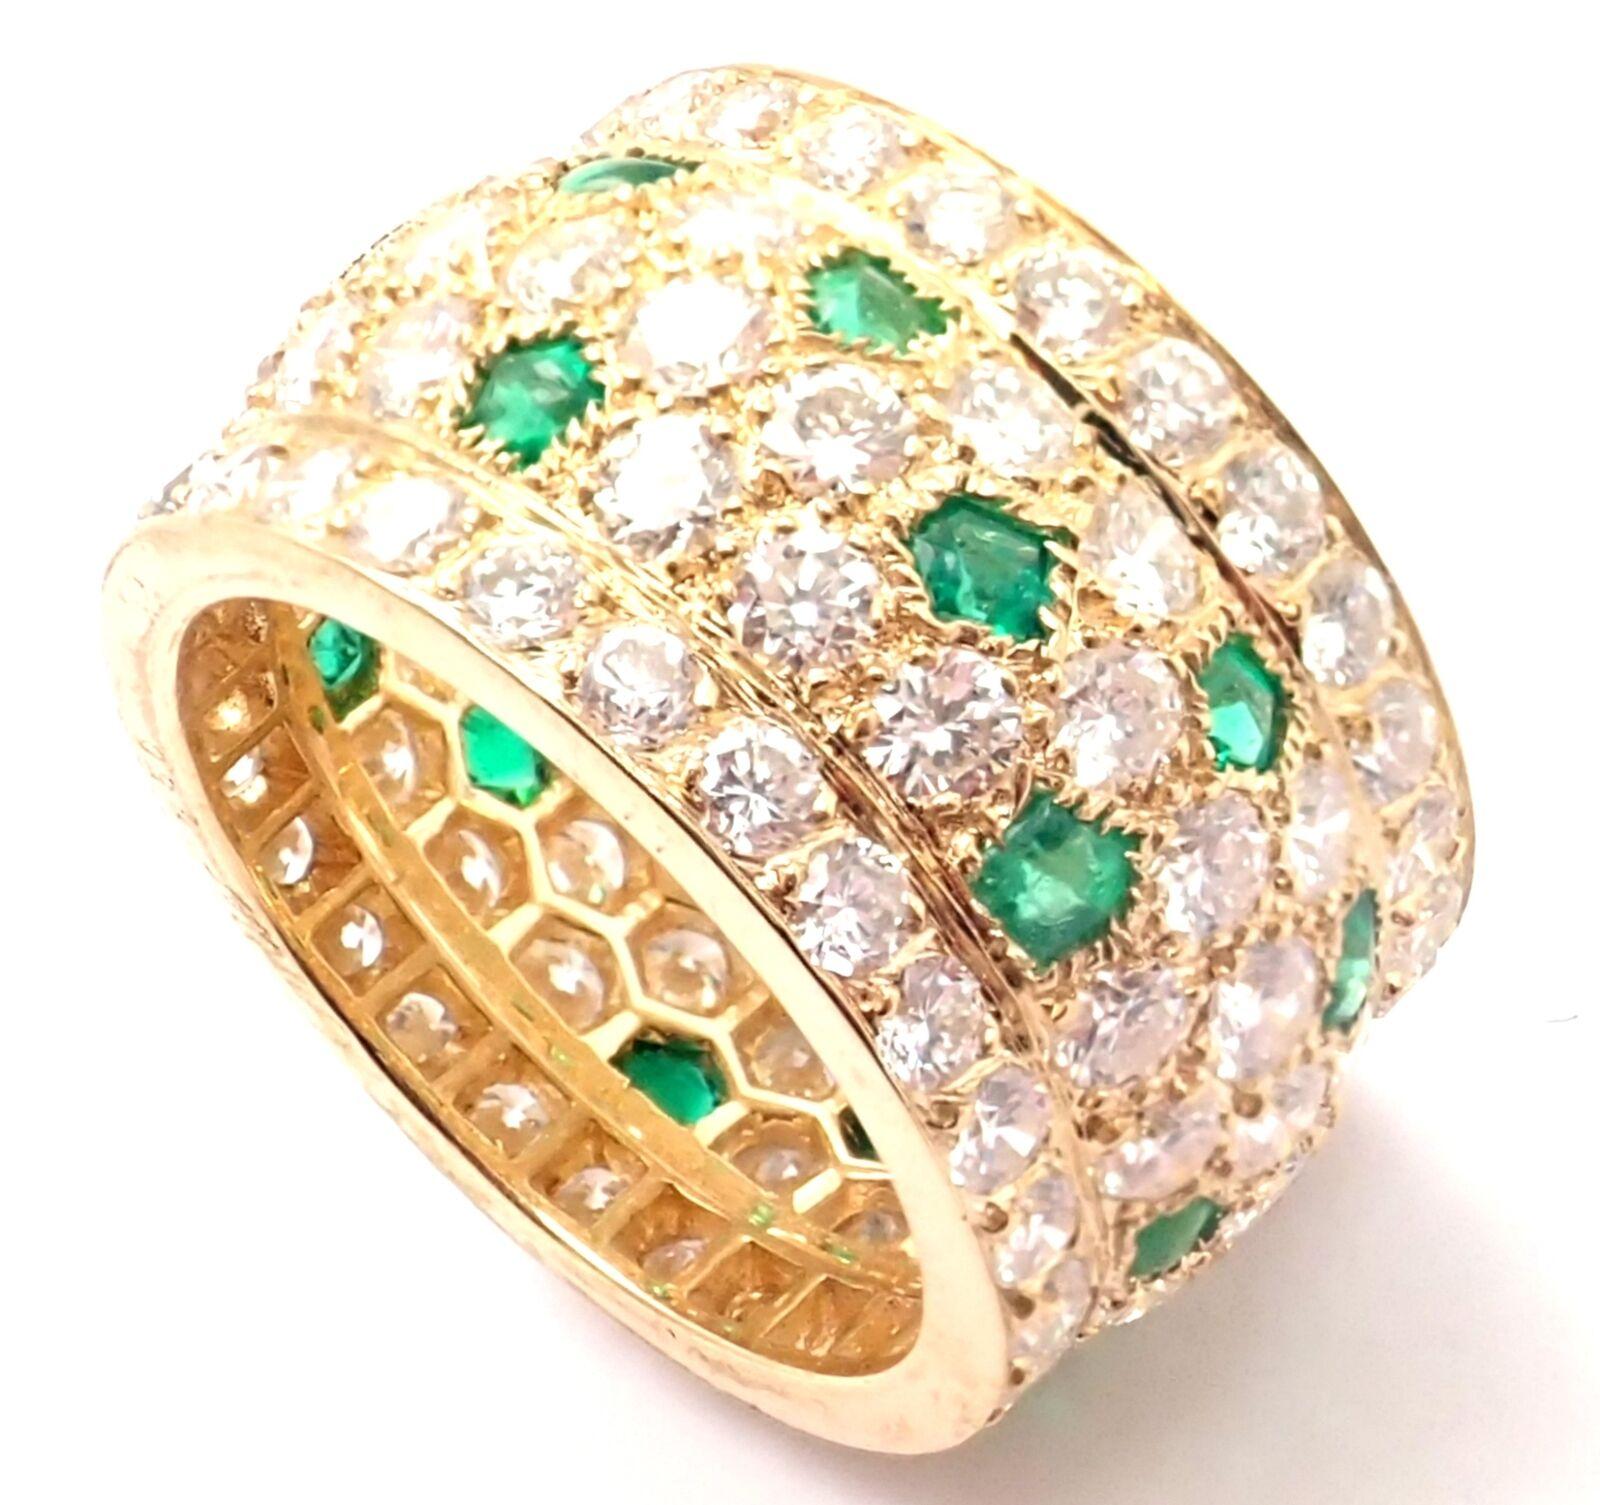 18k Yellow Gold Nigeria Diamond Emerald Wide Band Ring by Cartier.
With Round brilliant cut diamonds VVS1 clarity, F-H color And Buff Top emeralds total weight approximately 5.50ct
Details:
Ring Size: European 52, US 6
Band Width: 13mm
Weight: 9.8